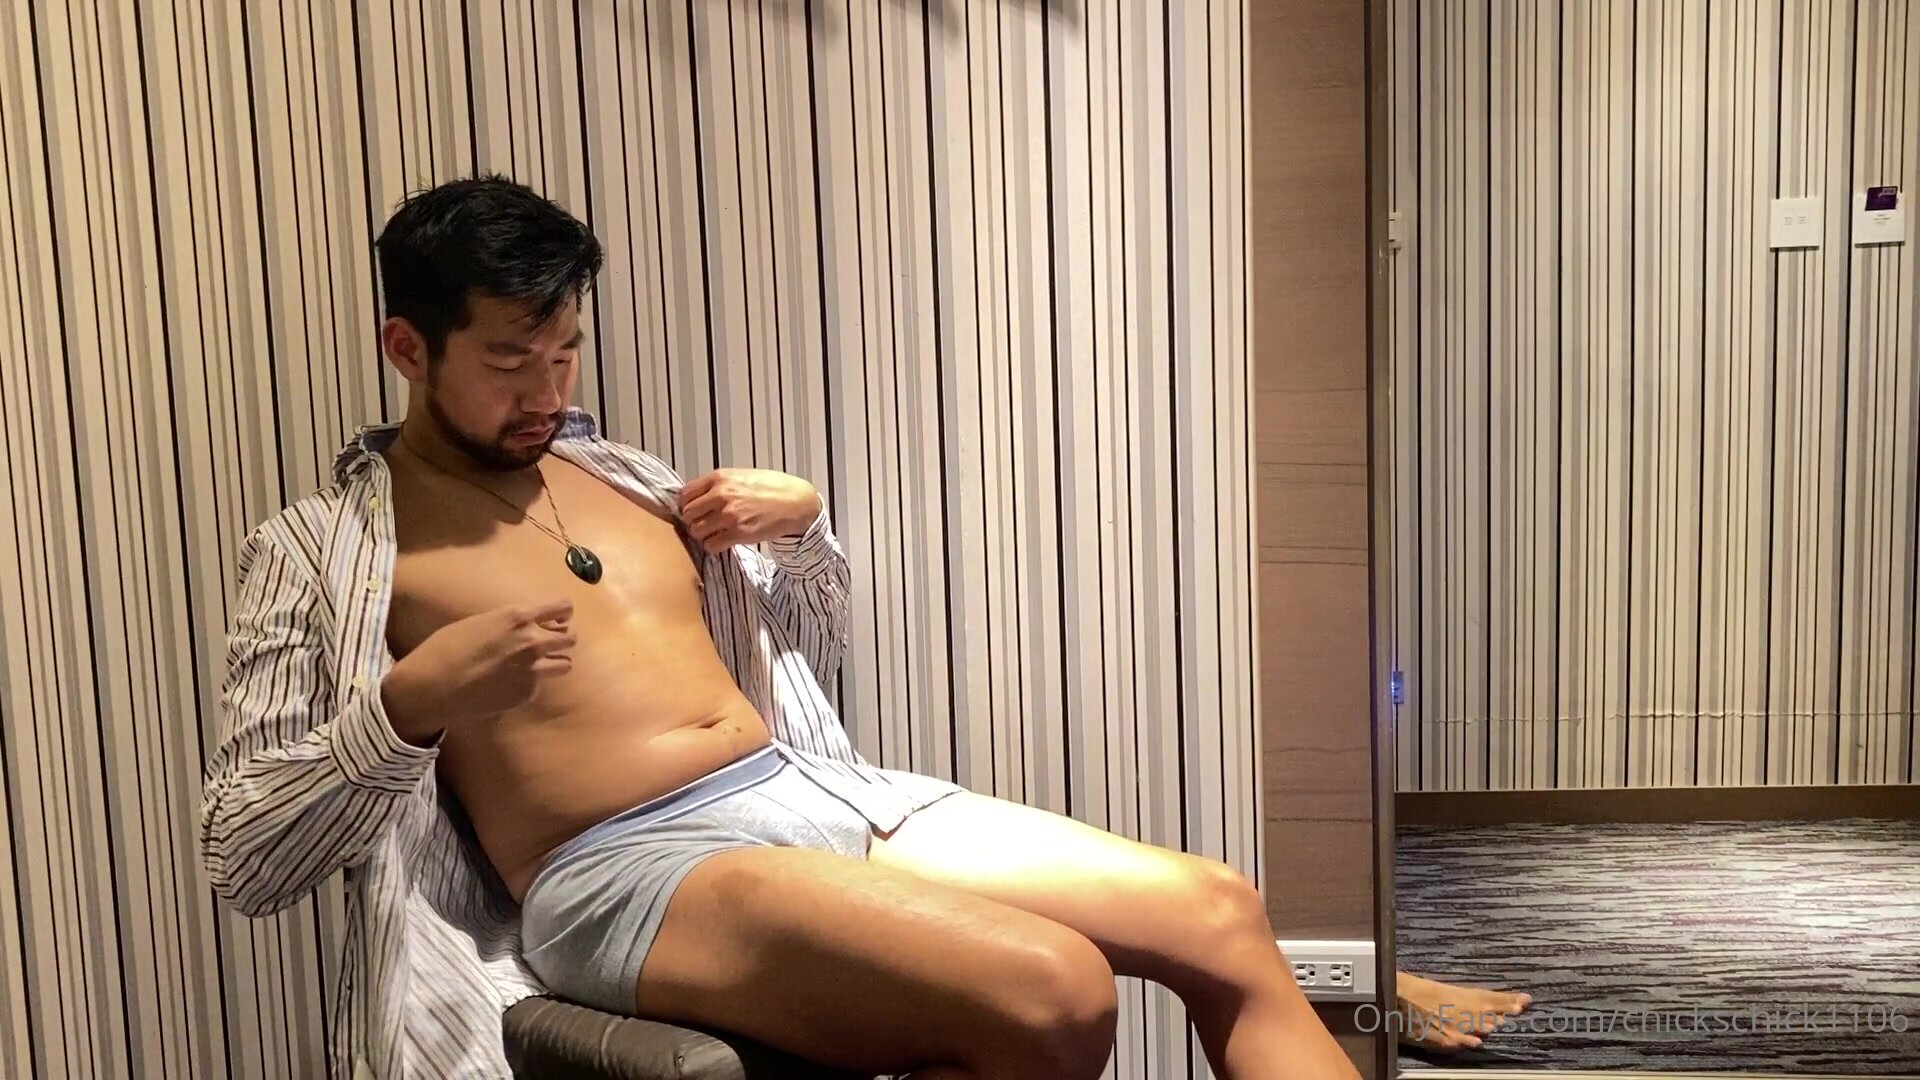 HOT ASIA GUY JERKING OFF Hotel